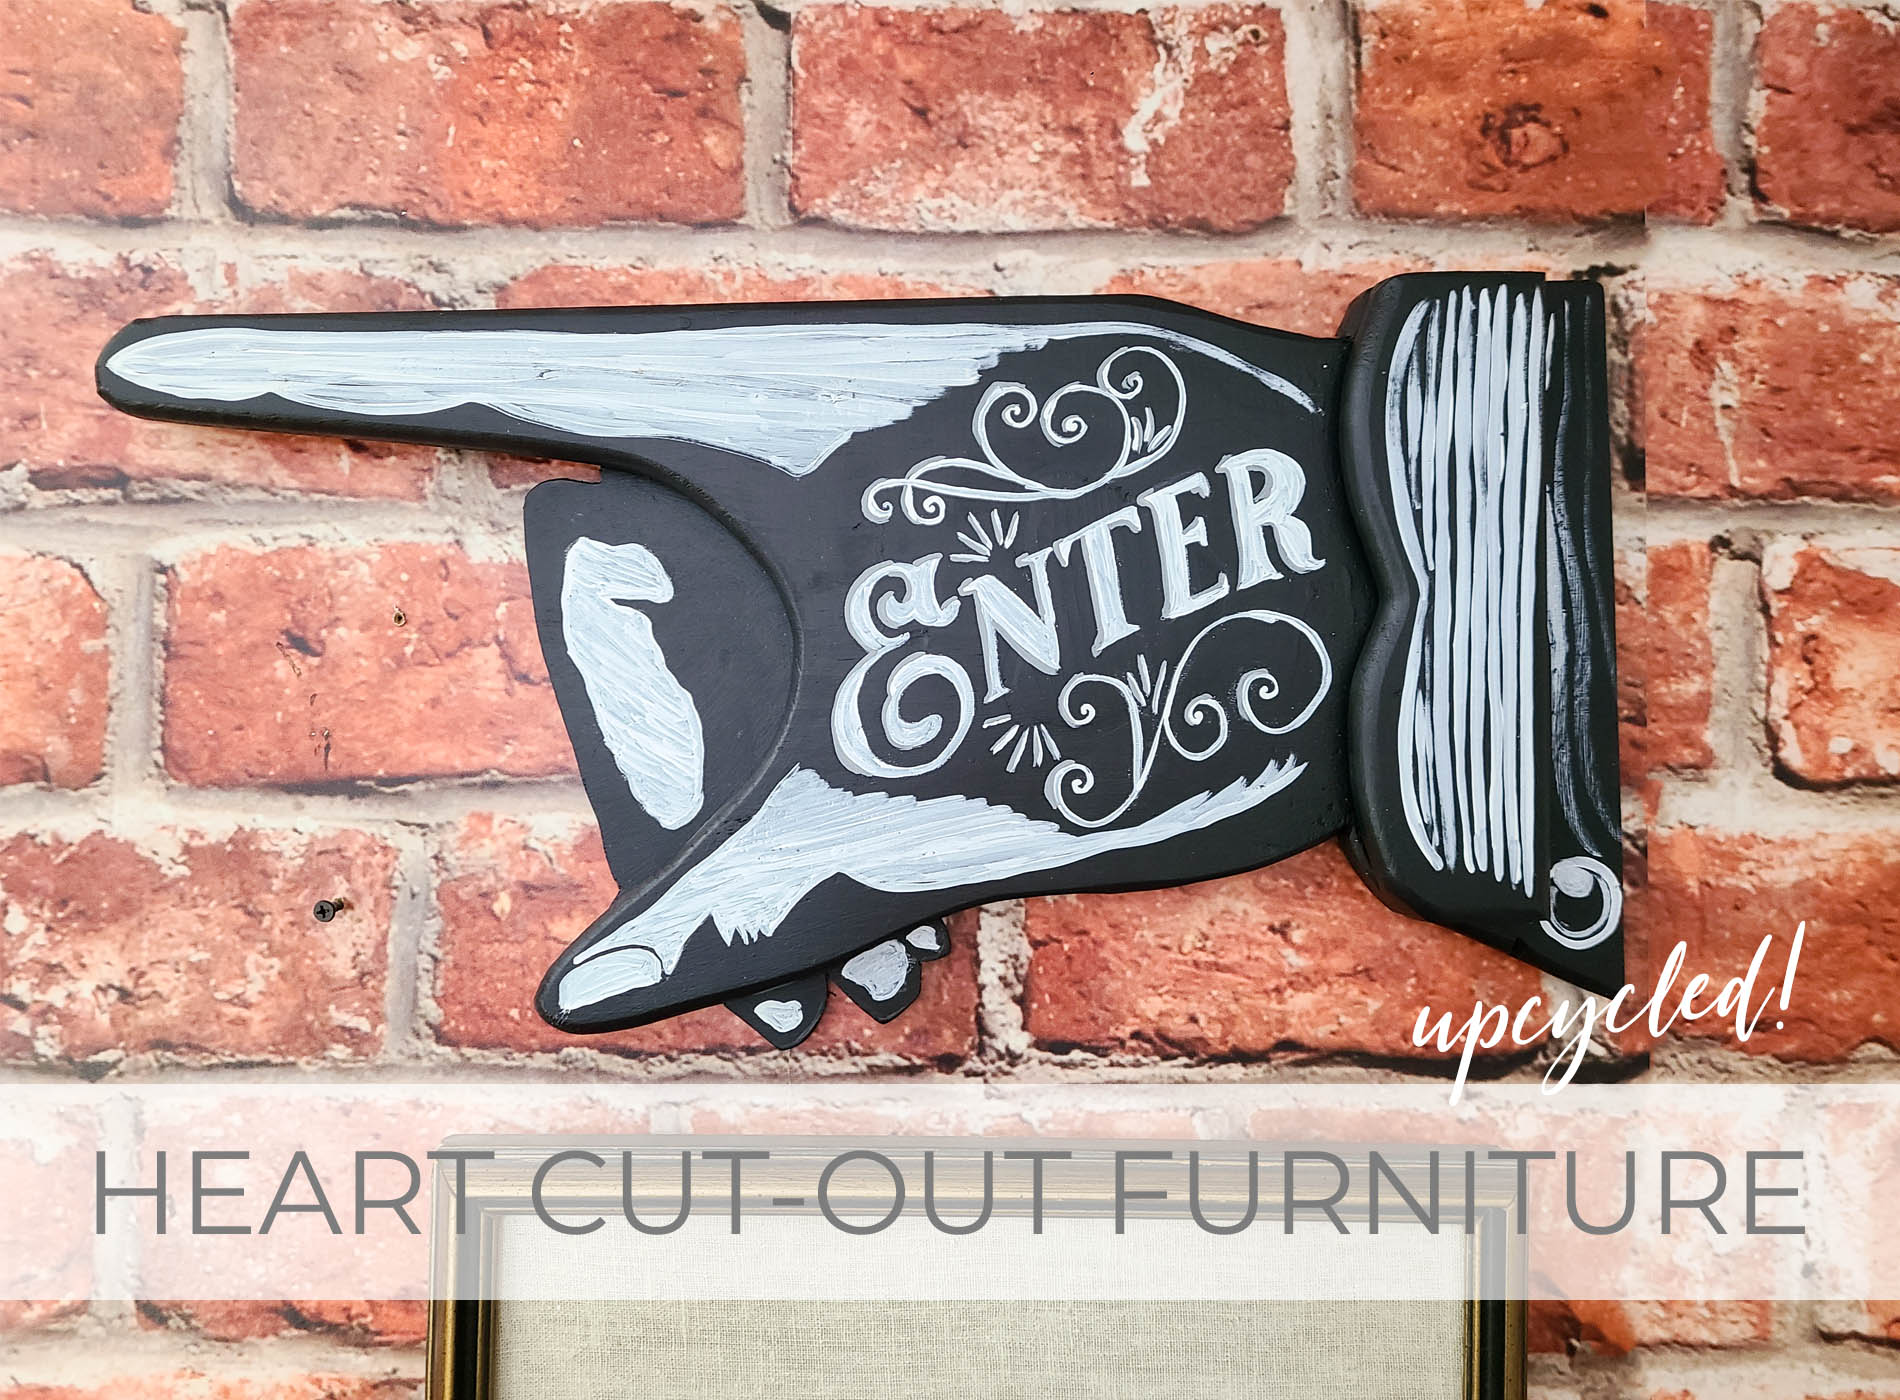 Upcycle that Heart Cut-Out Furniture into Home Decor | by Larissa of Prodigal Pieces | prodigalpieces.com #prodigalpieces